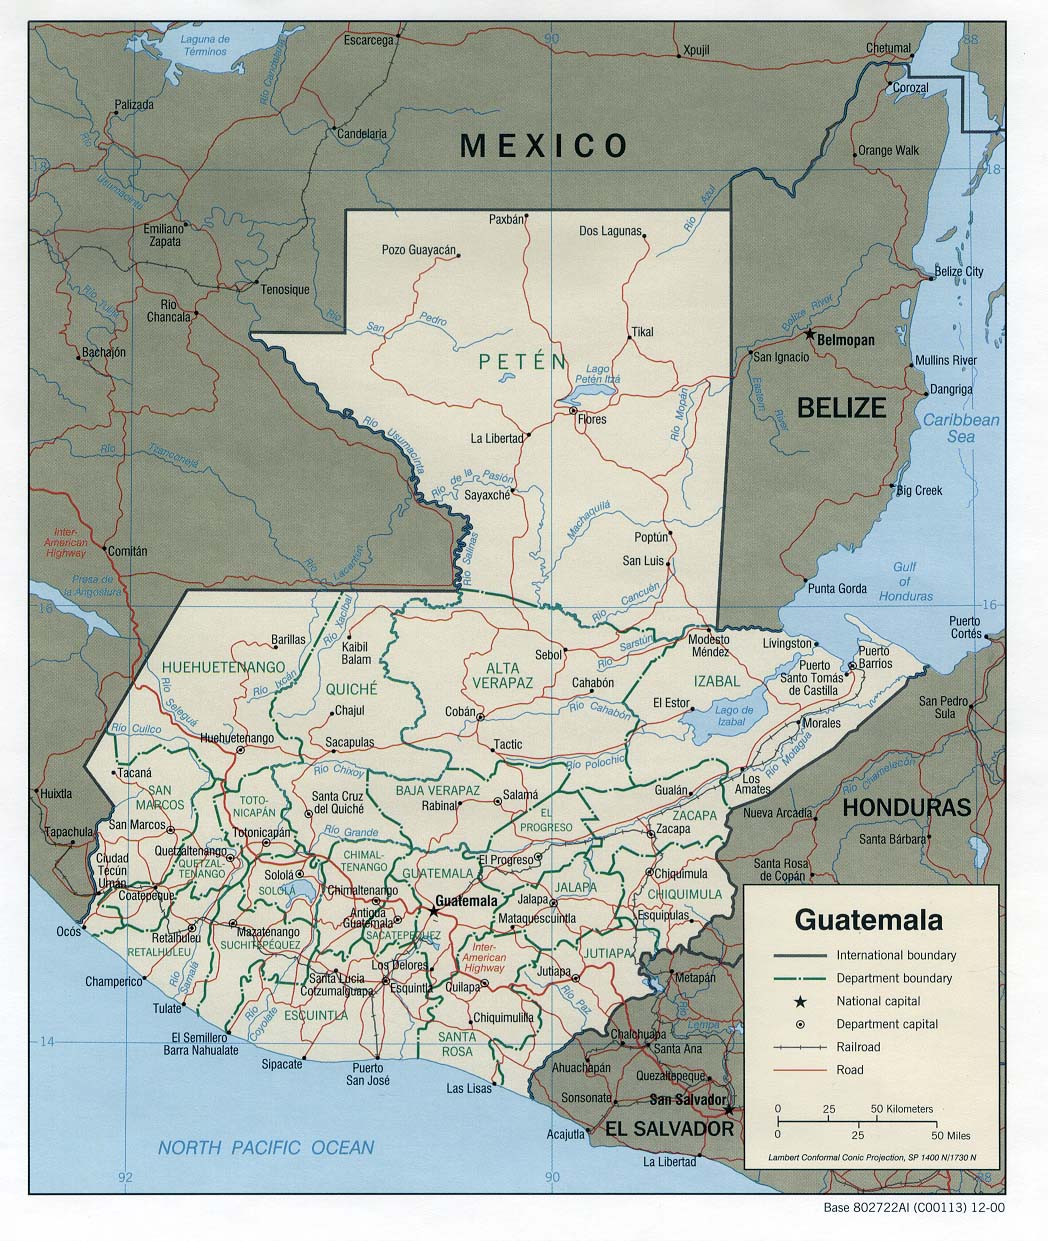 Guatemala Maps - Perry-Castañeda Map Collection - UT Library Online